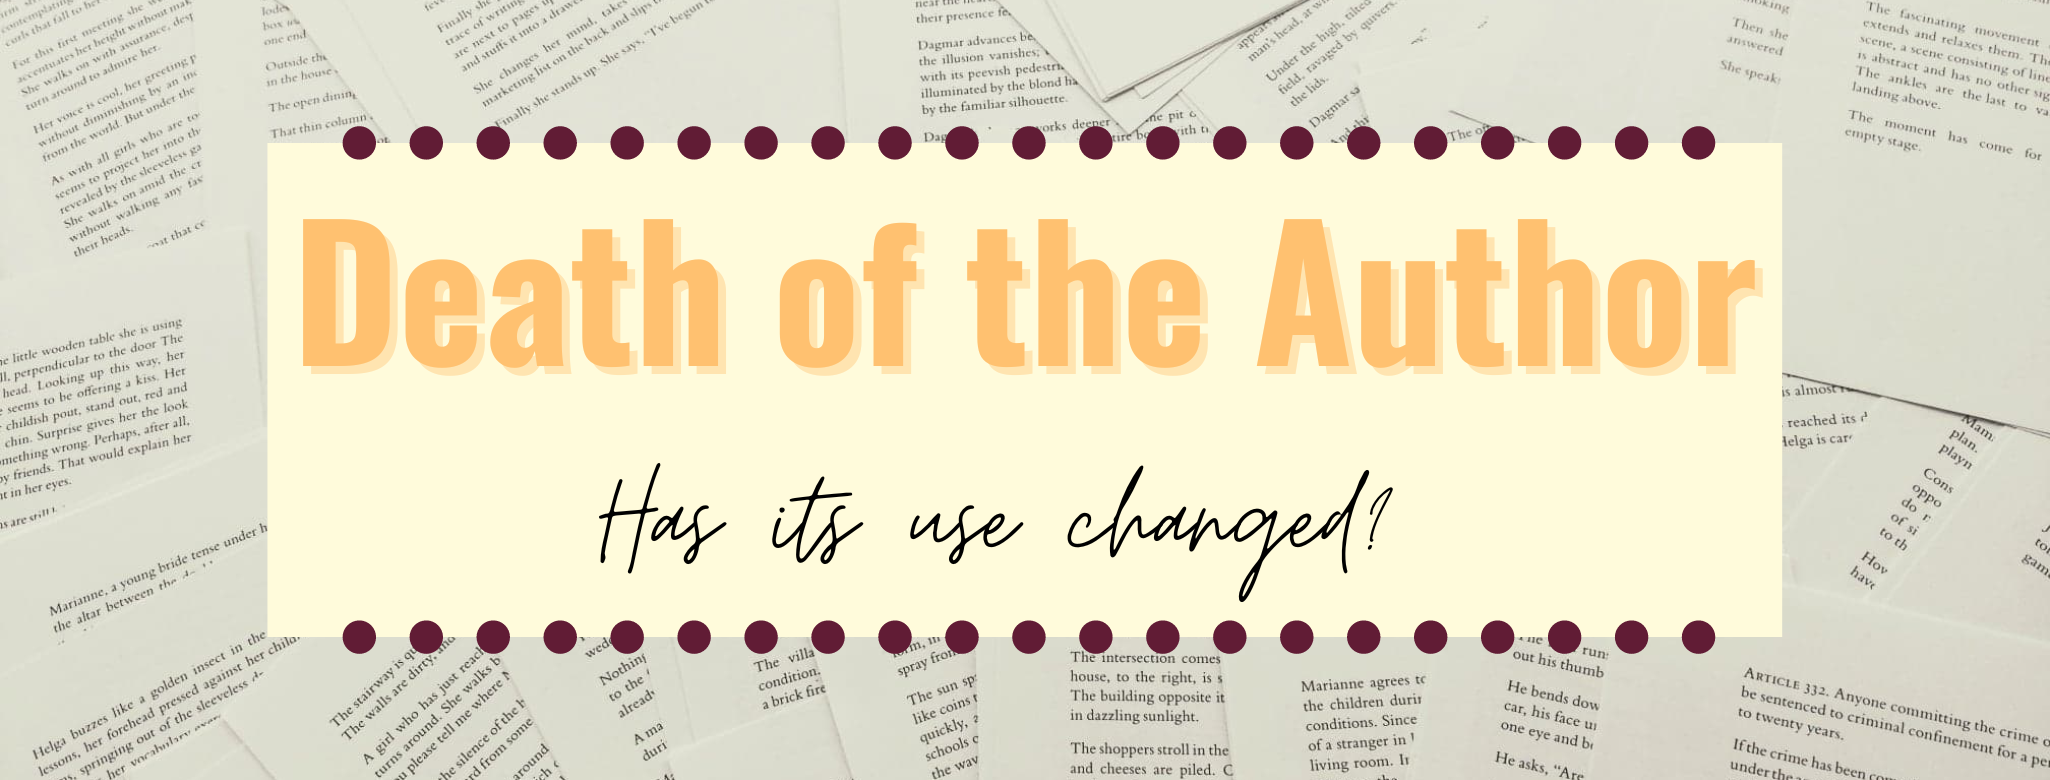 Death of the Author: Has its use changed? banner